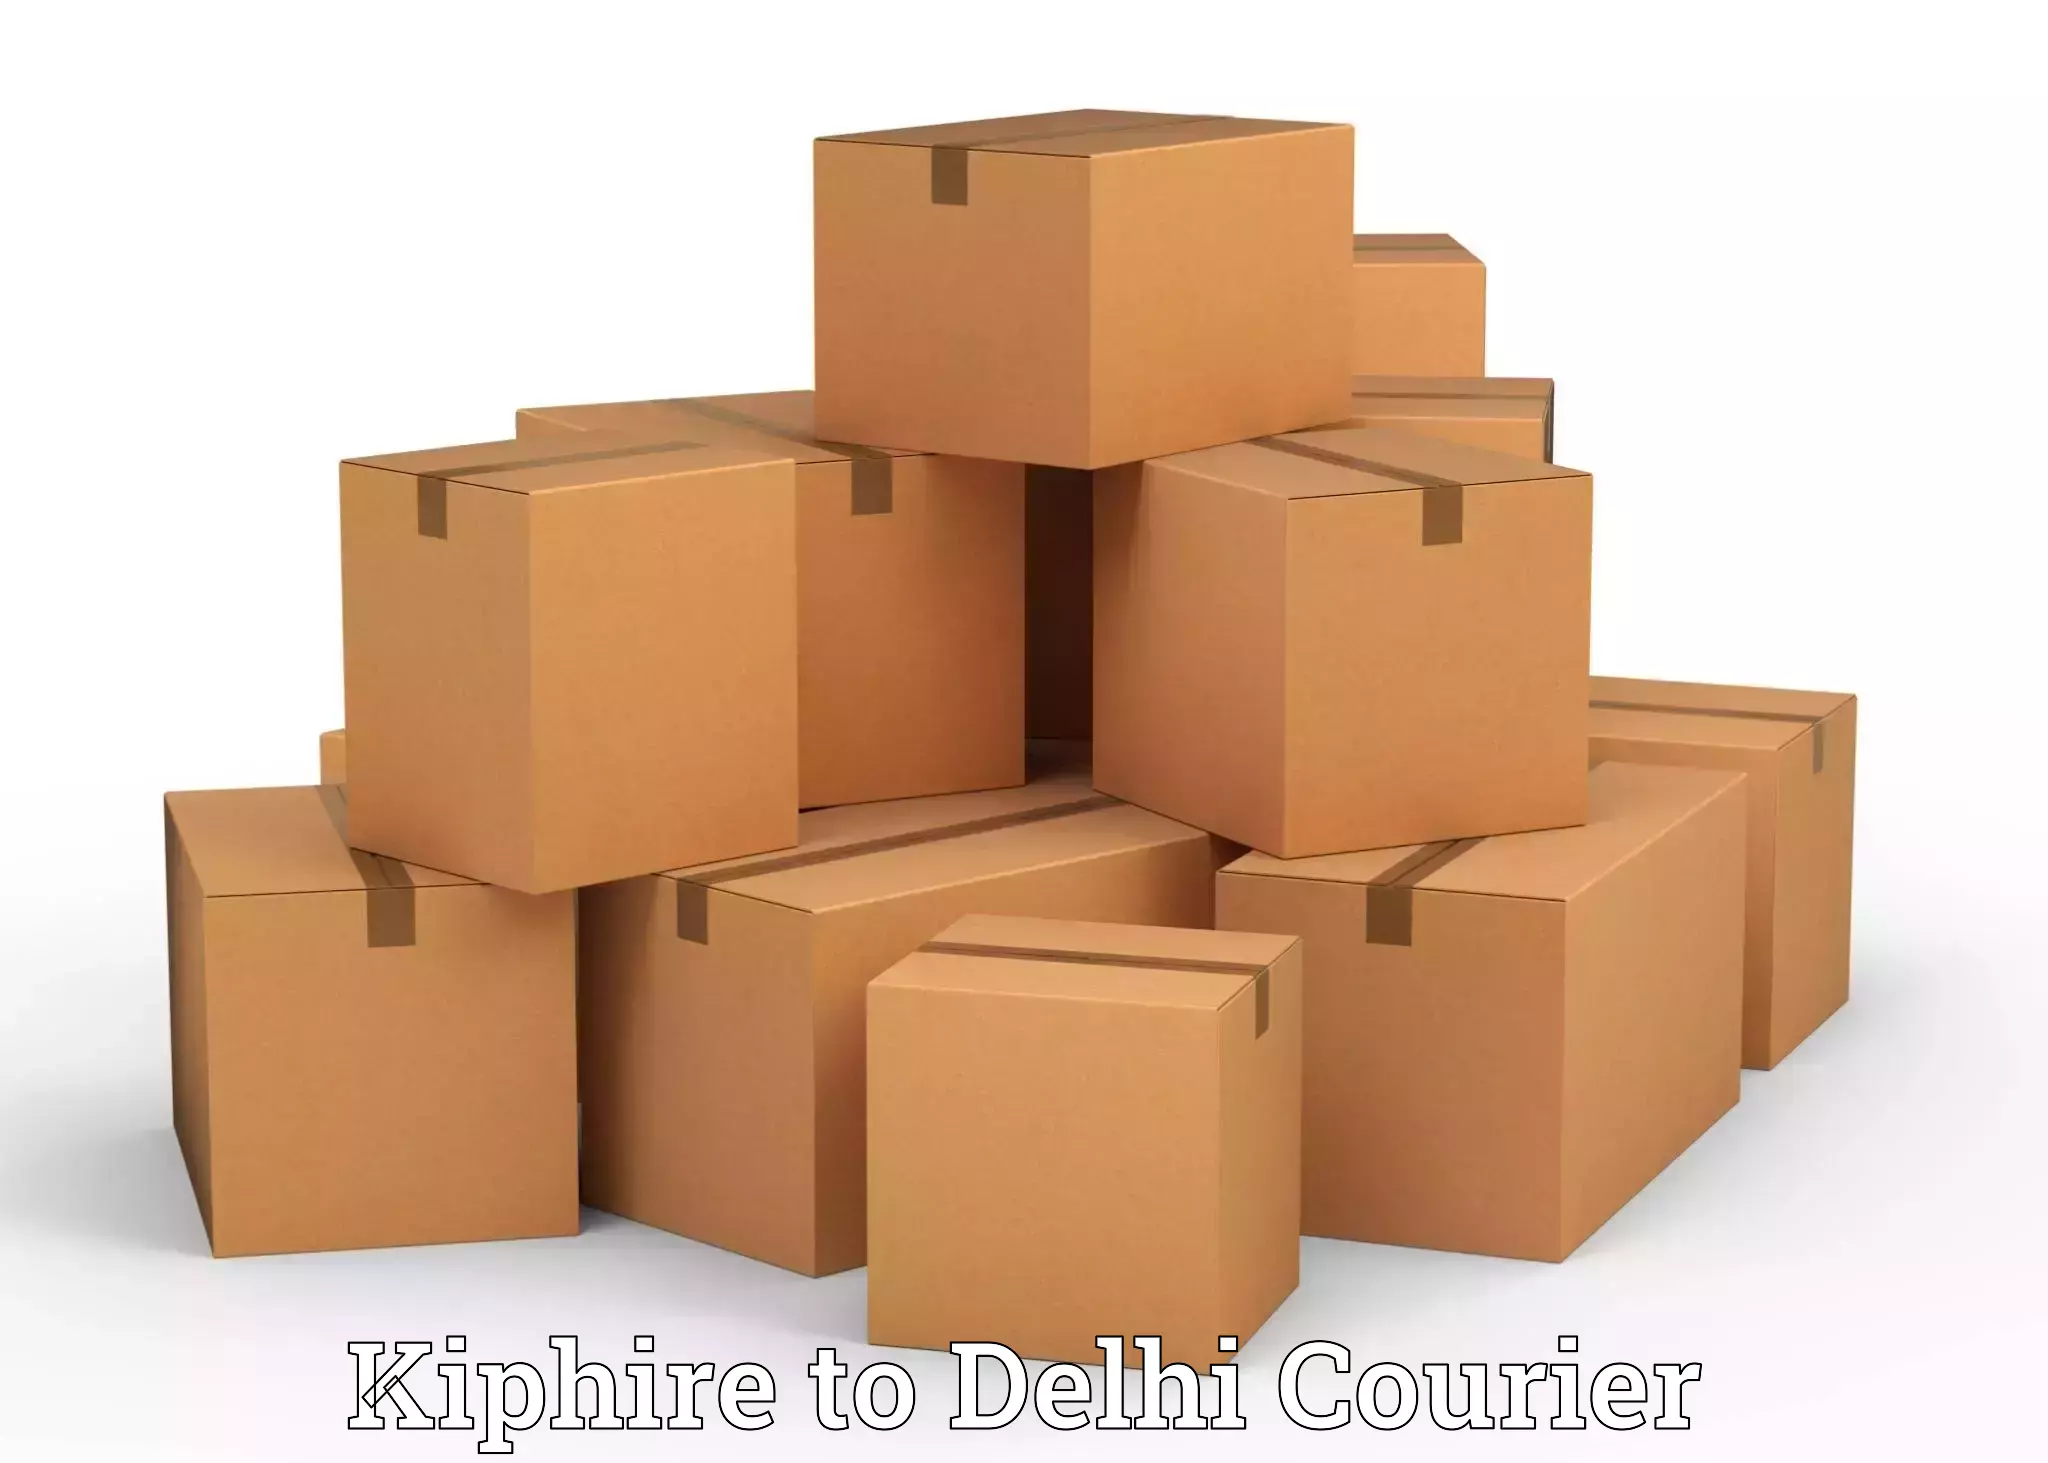 Efficient relocation services in Kiphire to University of Delhi